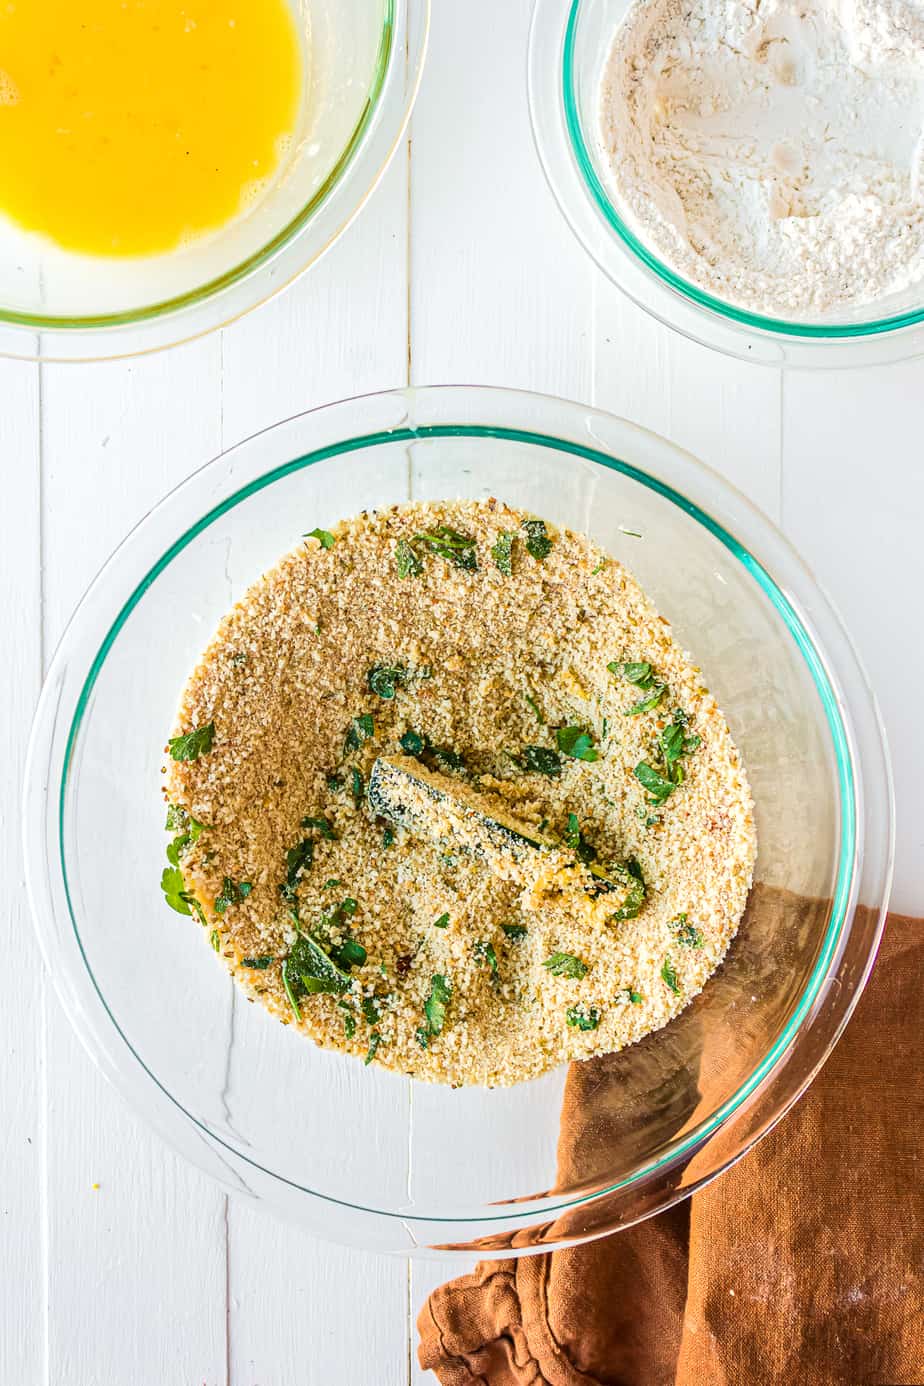 A slice of zucchini being coated in panko bread crumbs with herbs and parmesan cheese with a bowl of egg and a bowl of flour nearby from overhead.